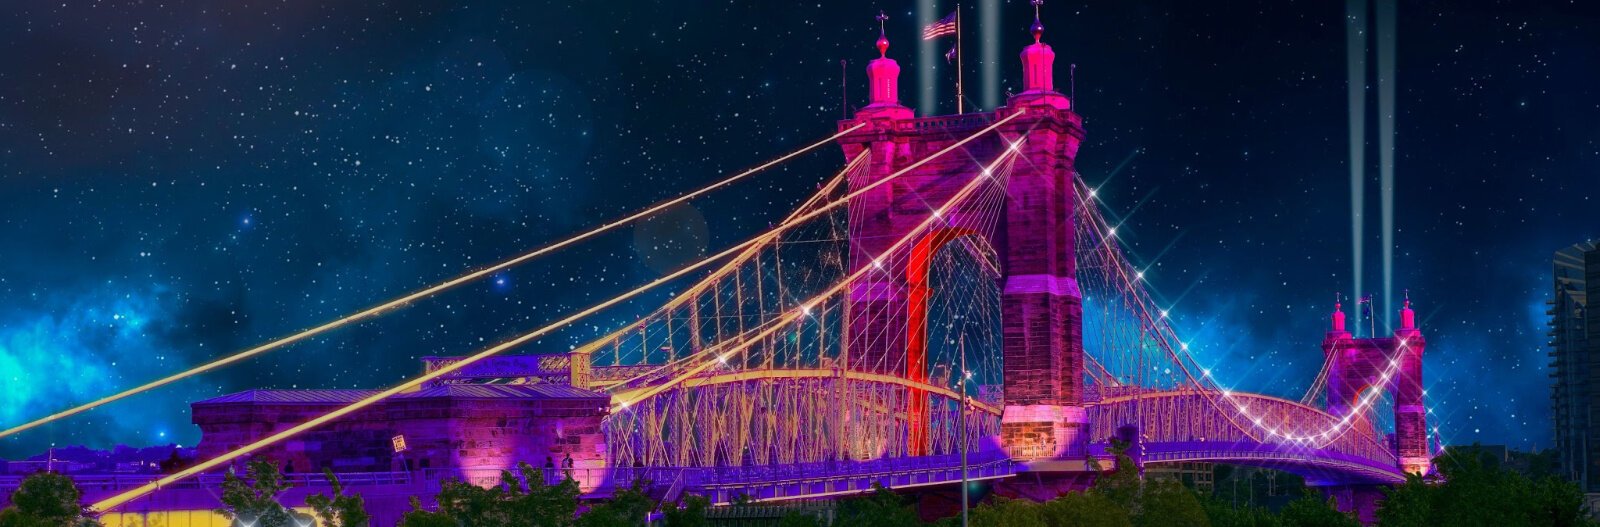 The Suspension Bridge will be lit up by an Erlanger-based company and set to music for Blink 2019.